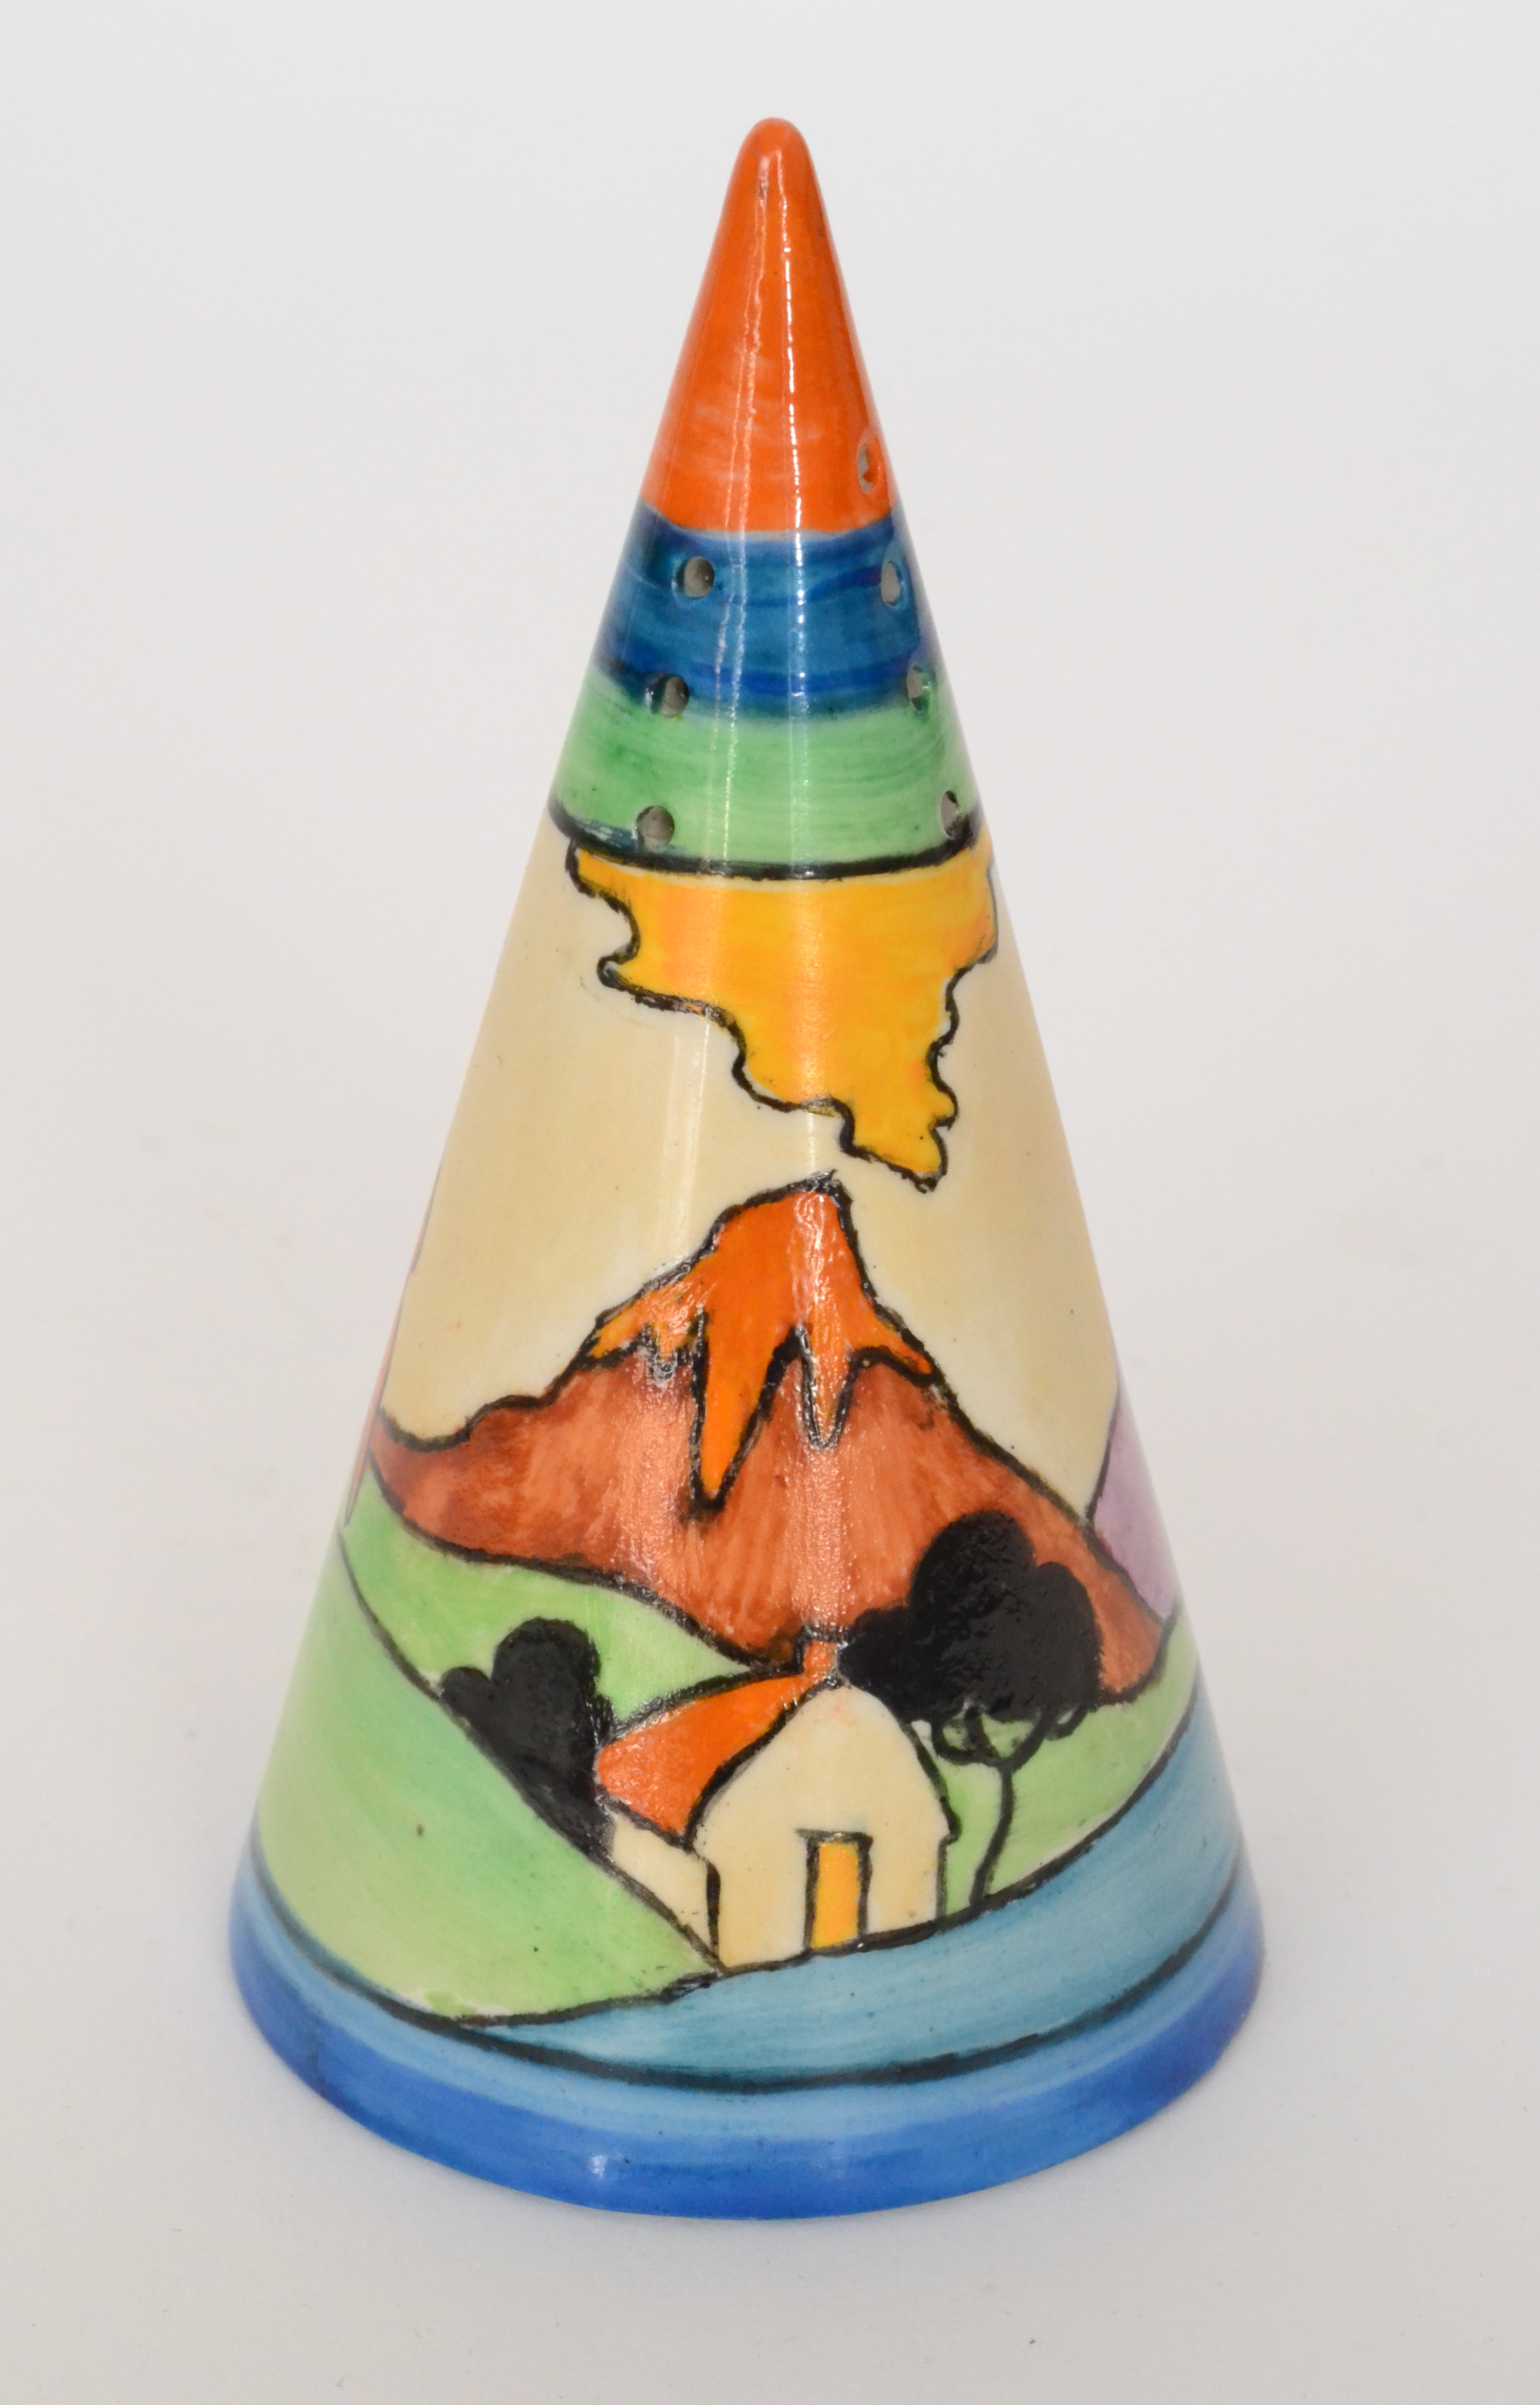 A Terry Abbots tribute conical sugar sifter decorated in the Mountain pattern,